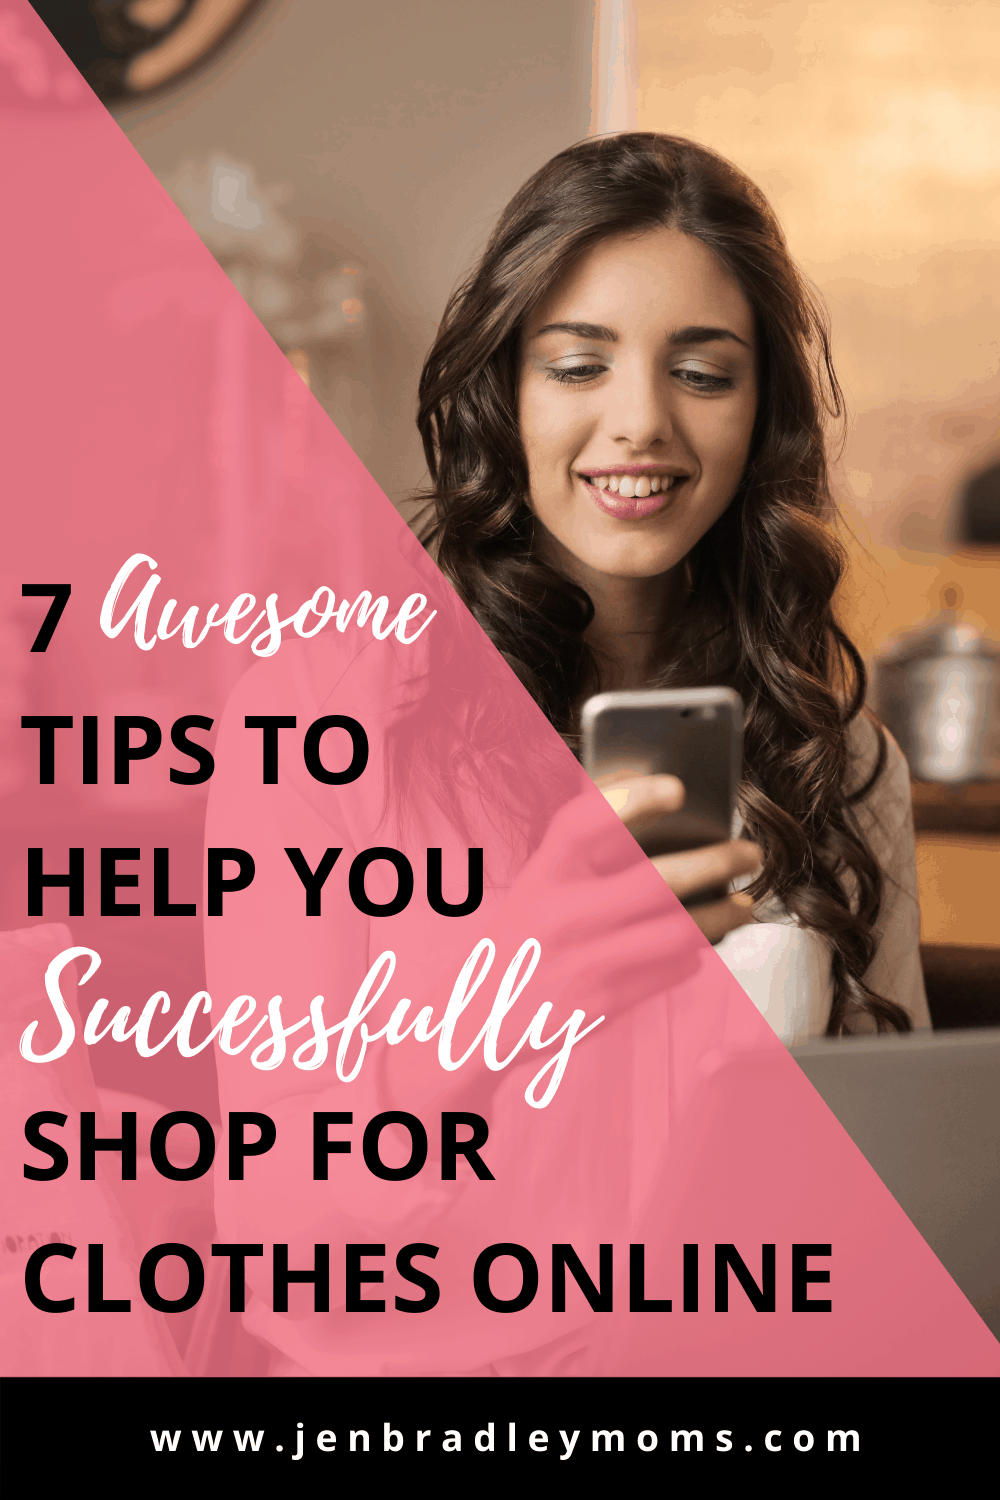 7 Awesome Tips to Know How to Shop for Clothes Online